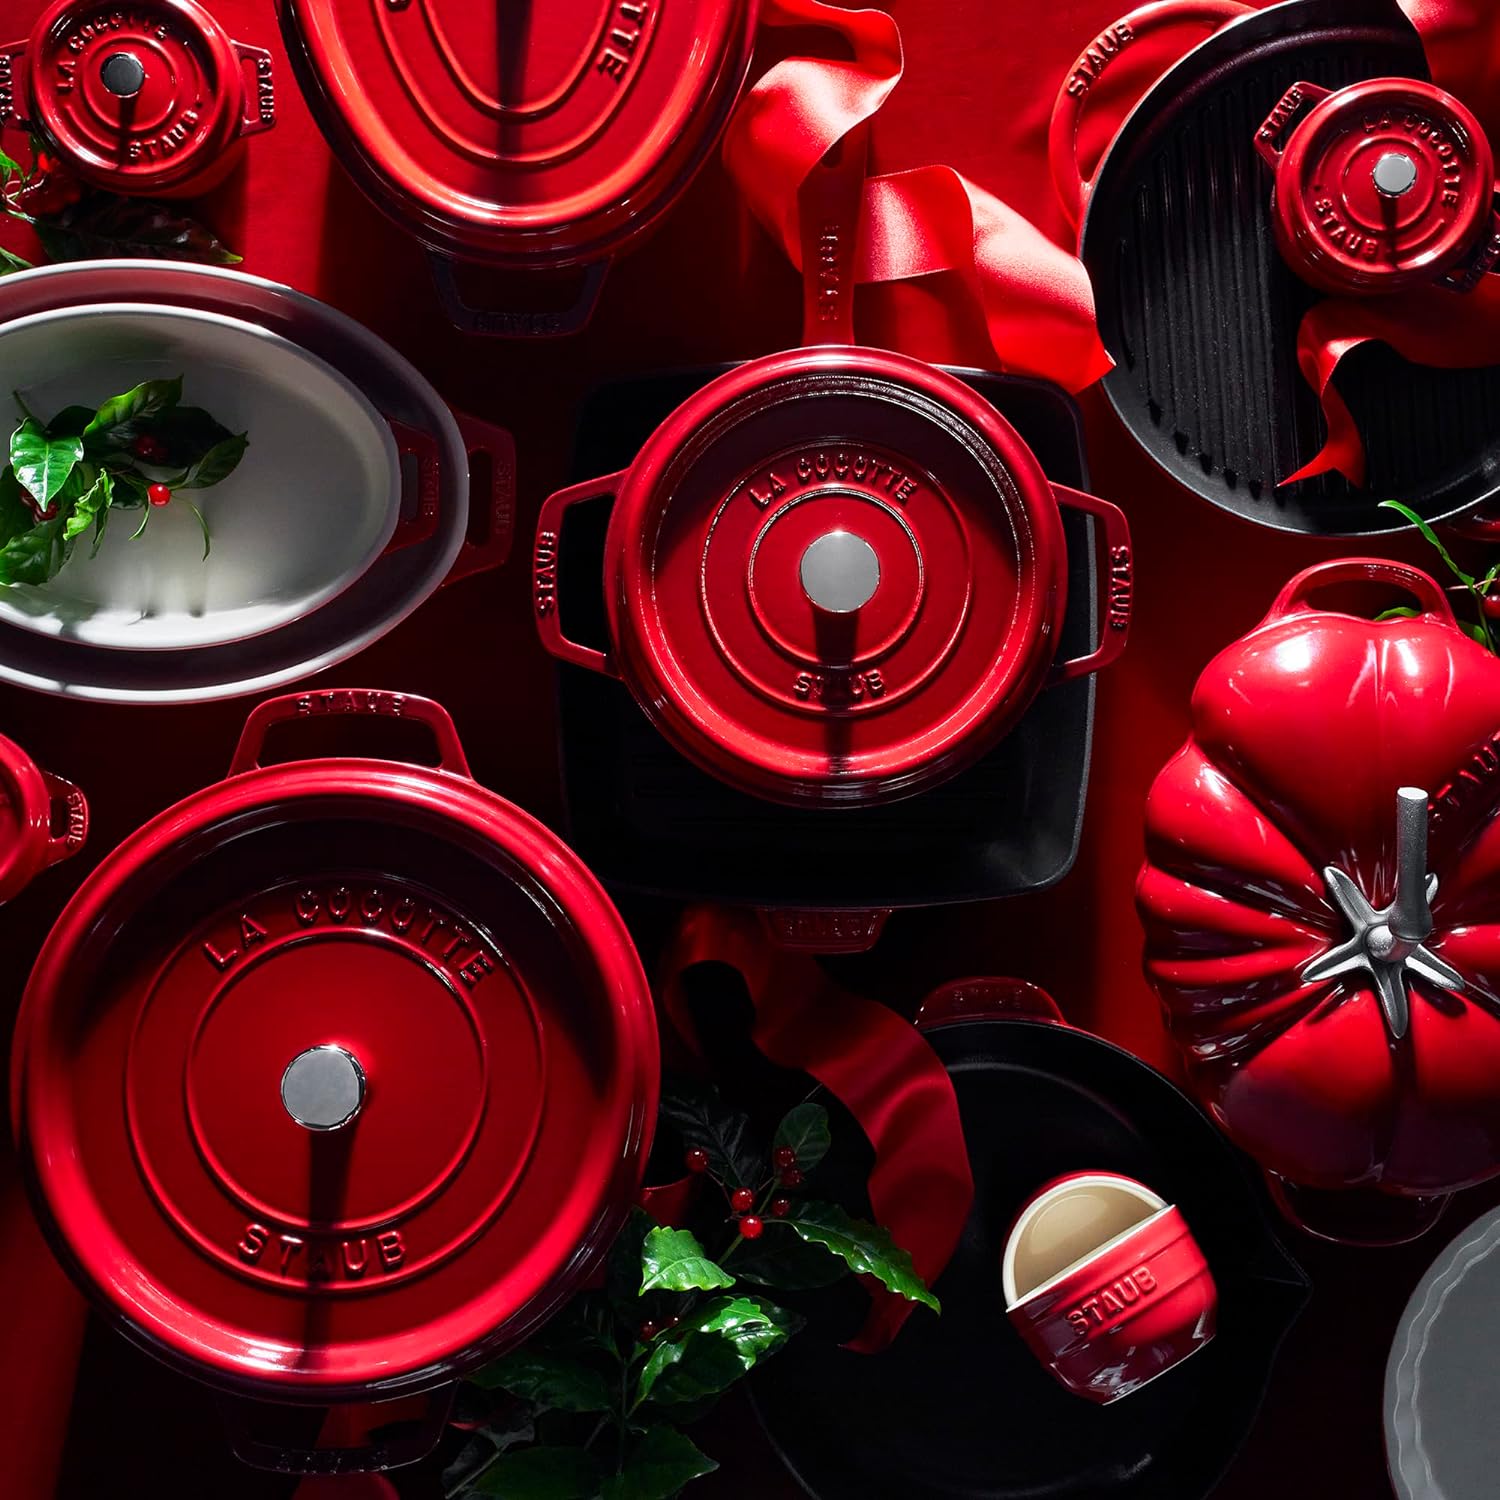 The Best  Deals on Staub Cookware: Save Up to 57% on Dutch